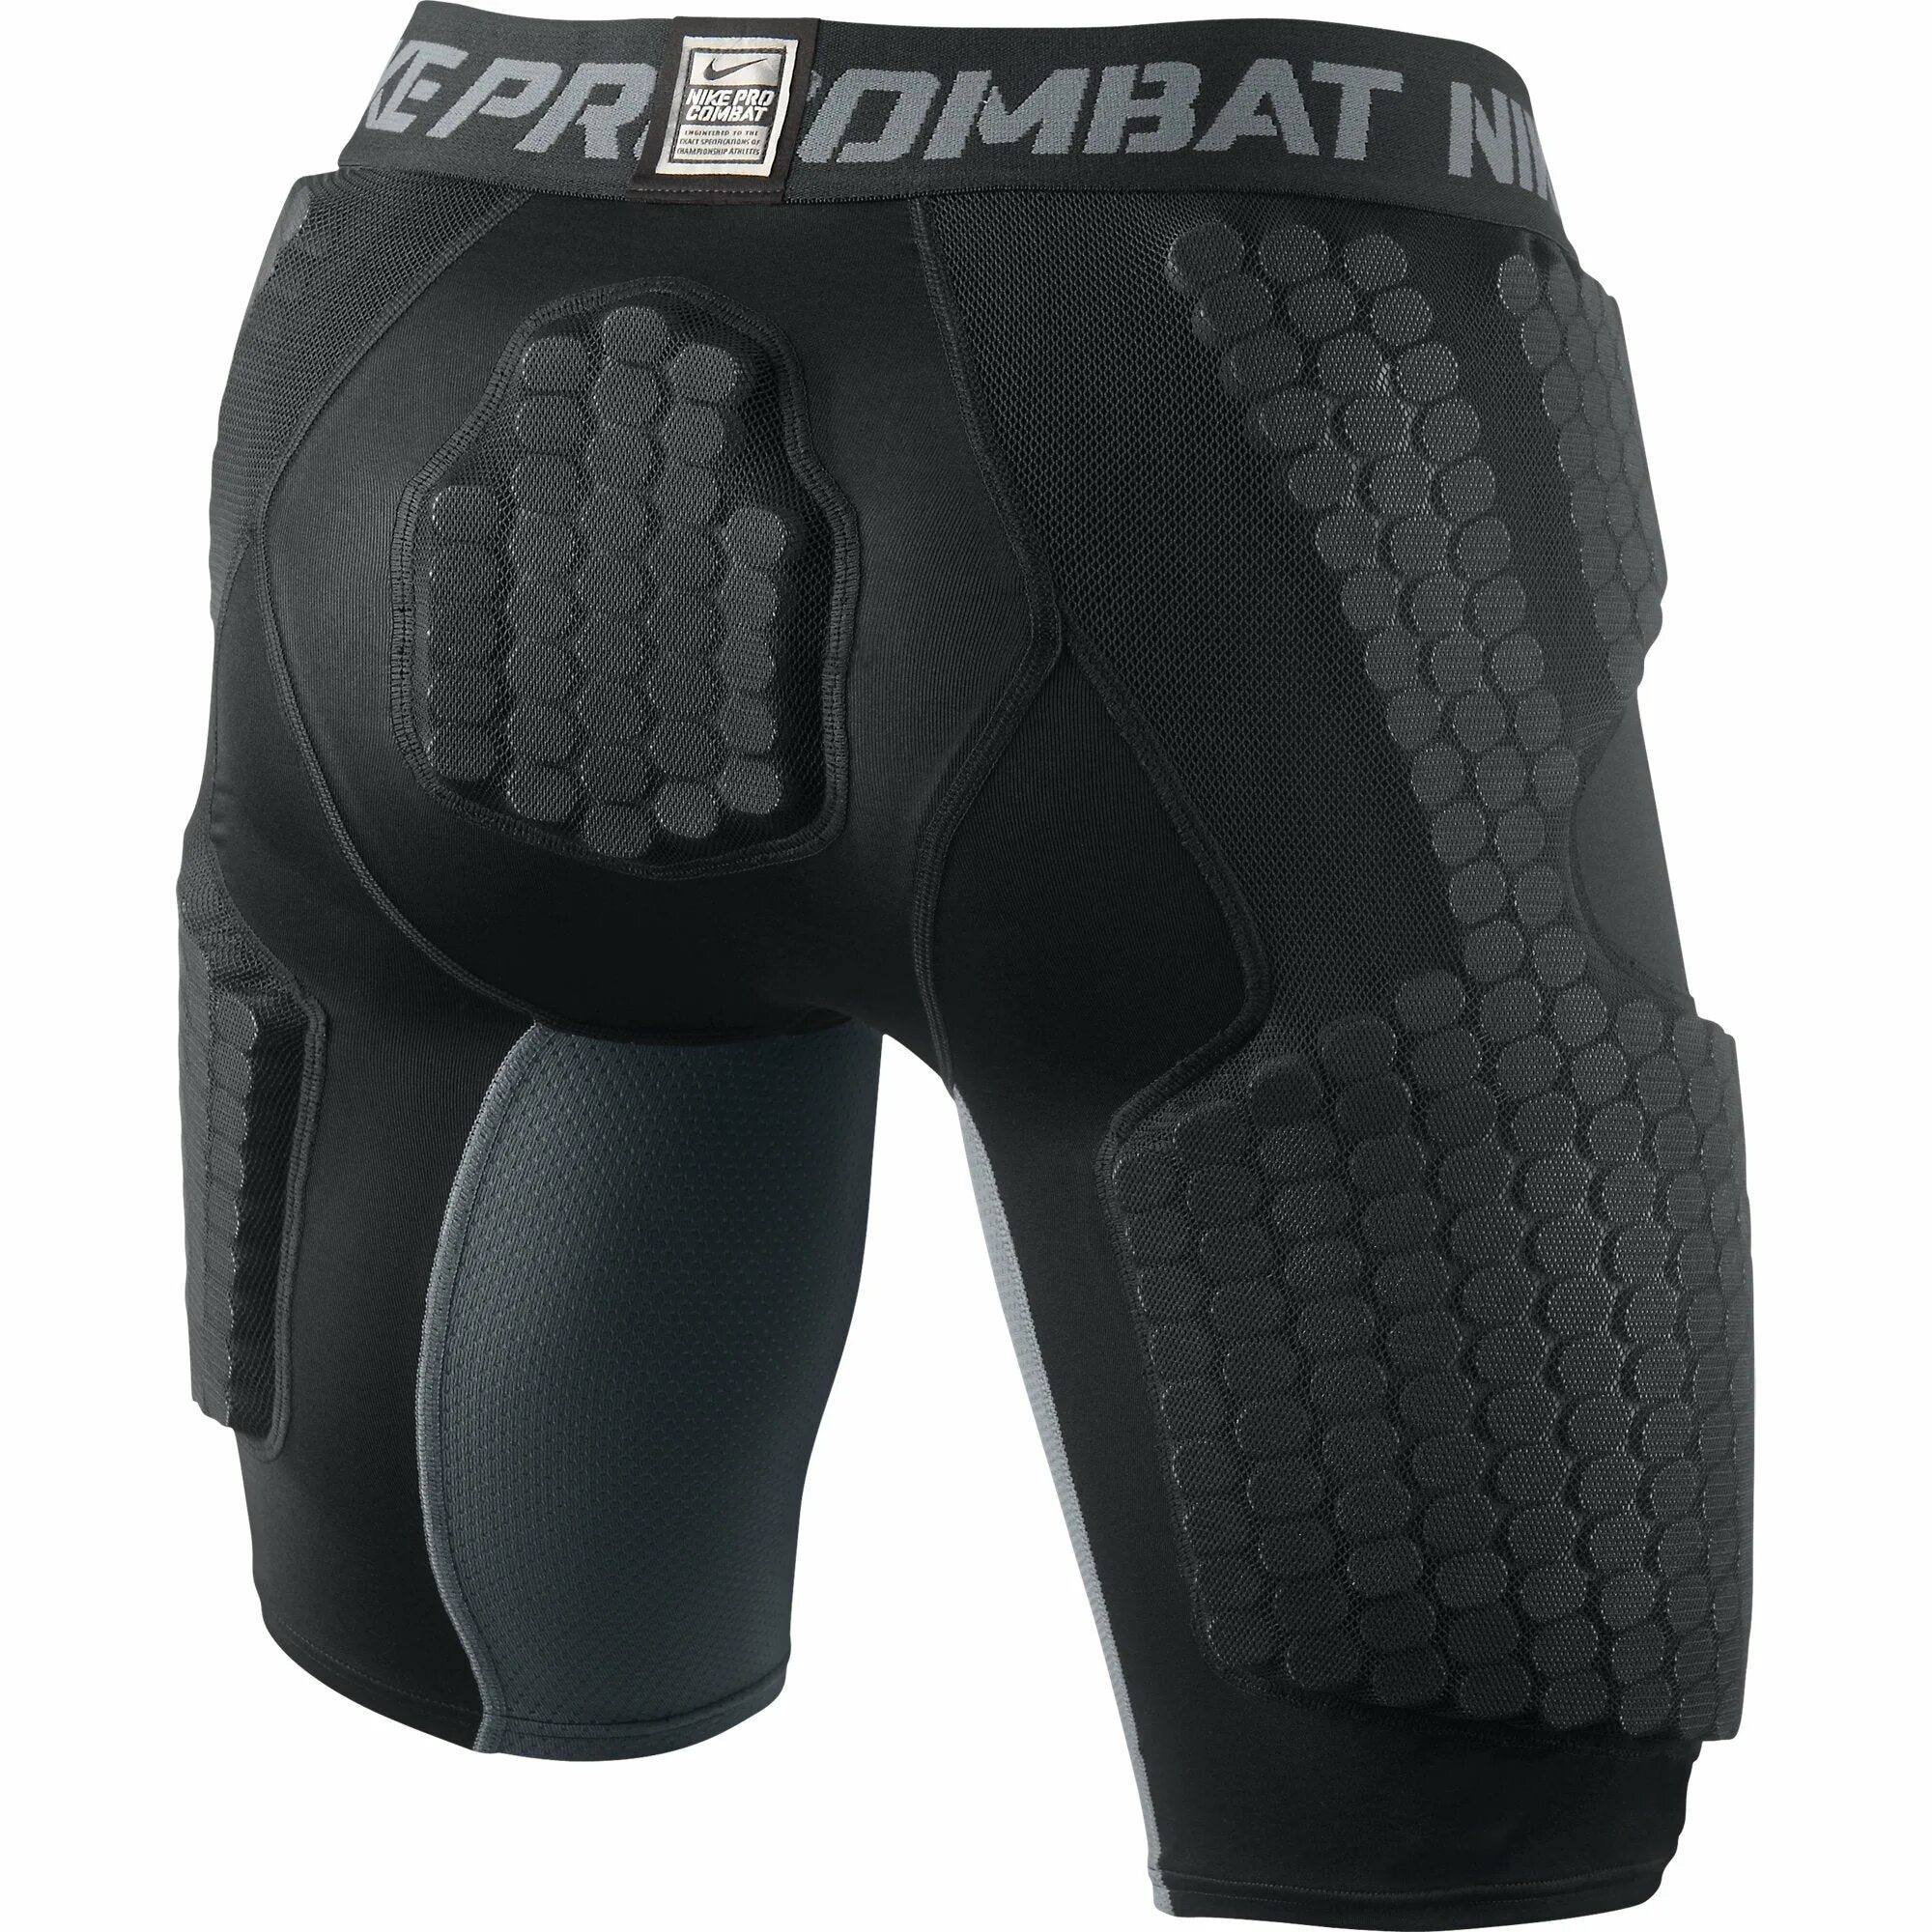 Nike combat. Nike Pro Hyperstrong Compression шорты. Nike Combat Compression. Nike шорты NPC Hyperstrong. Nike Pro Combat.